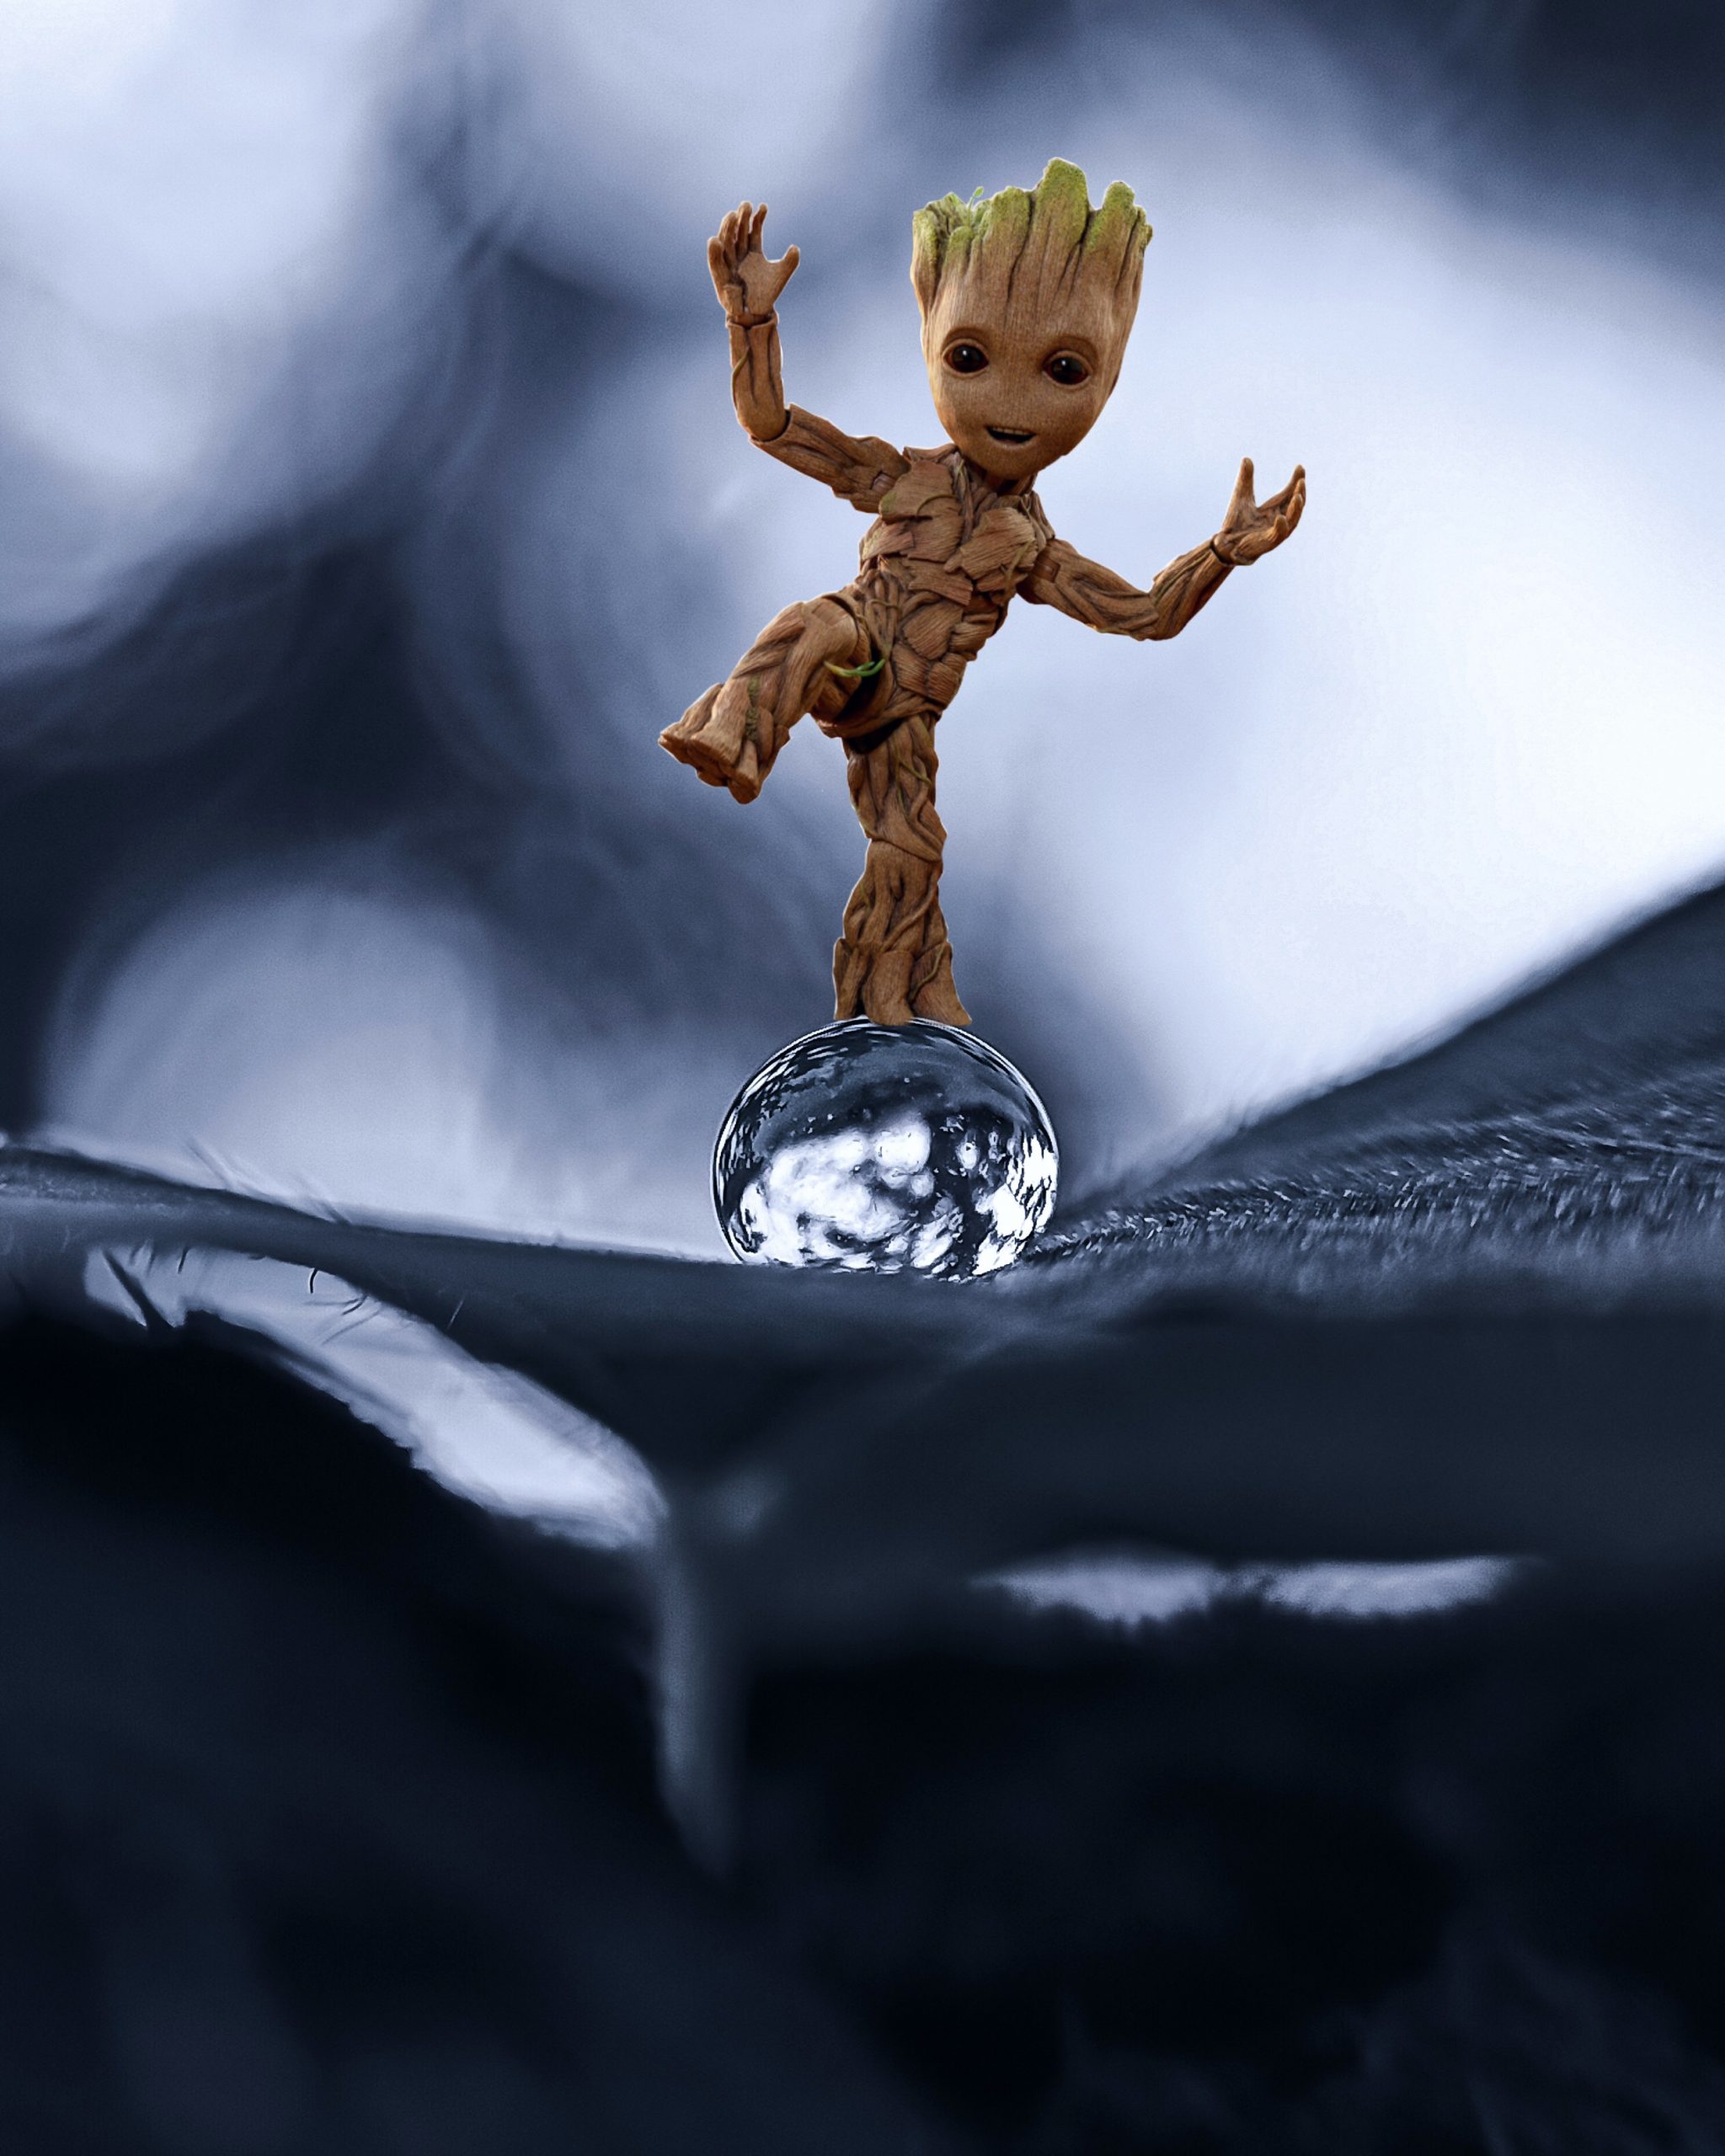 Fictional character Groot on a drop